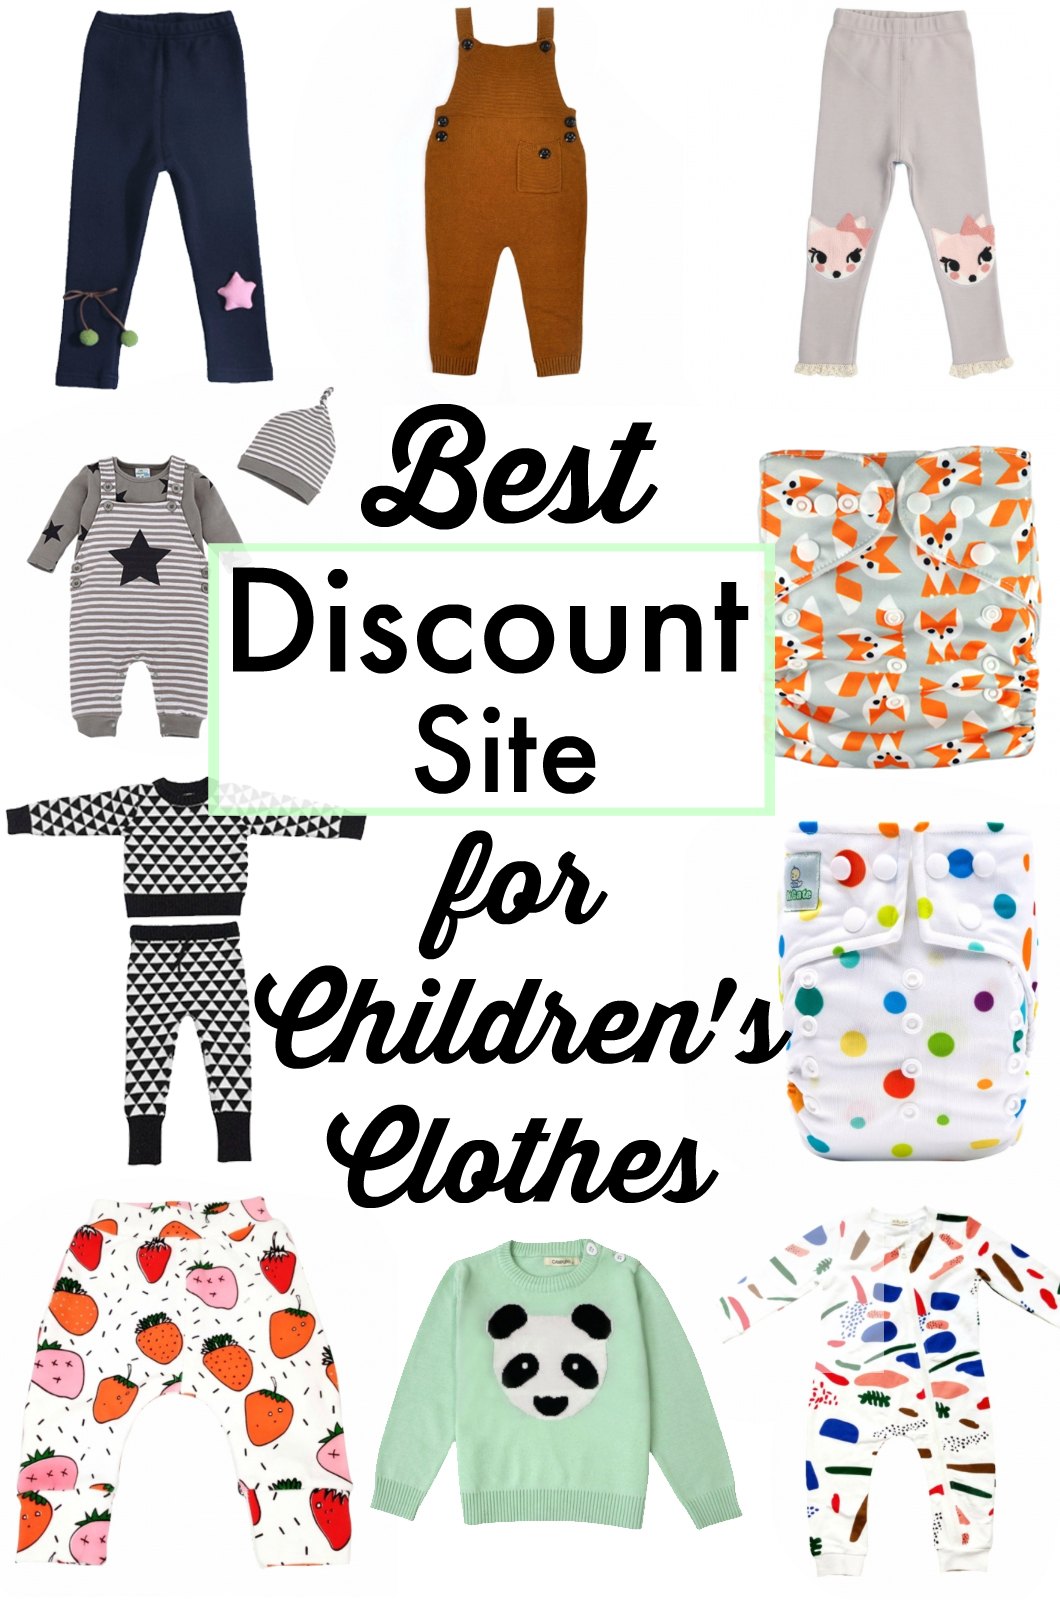 Best Discount Site for Children's Clothes